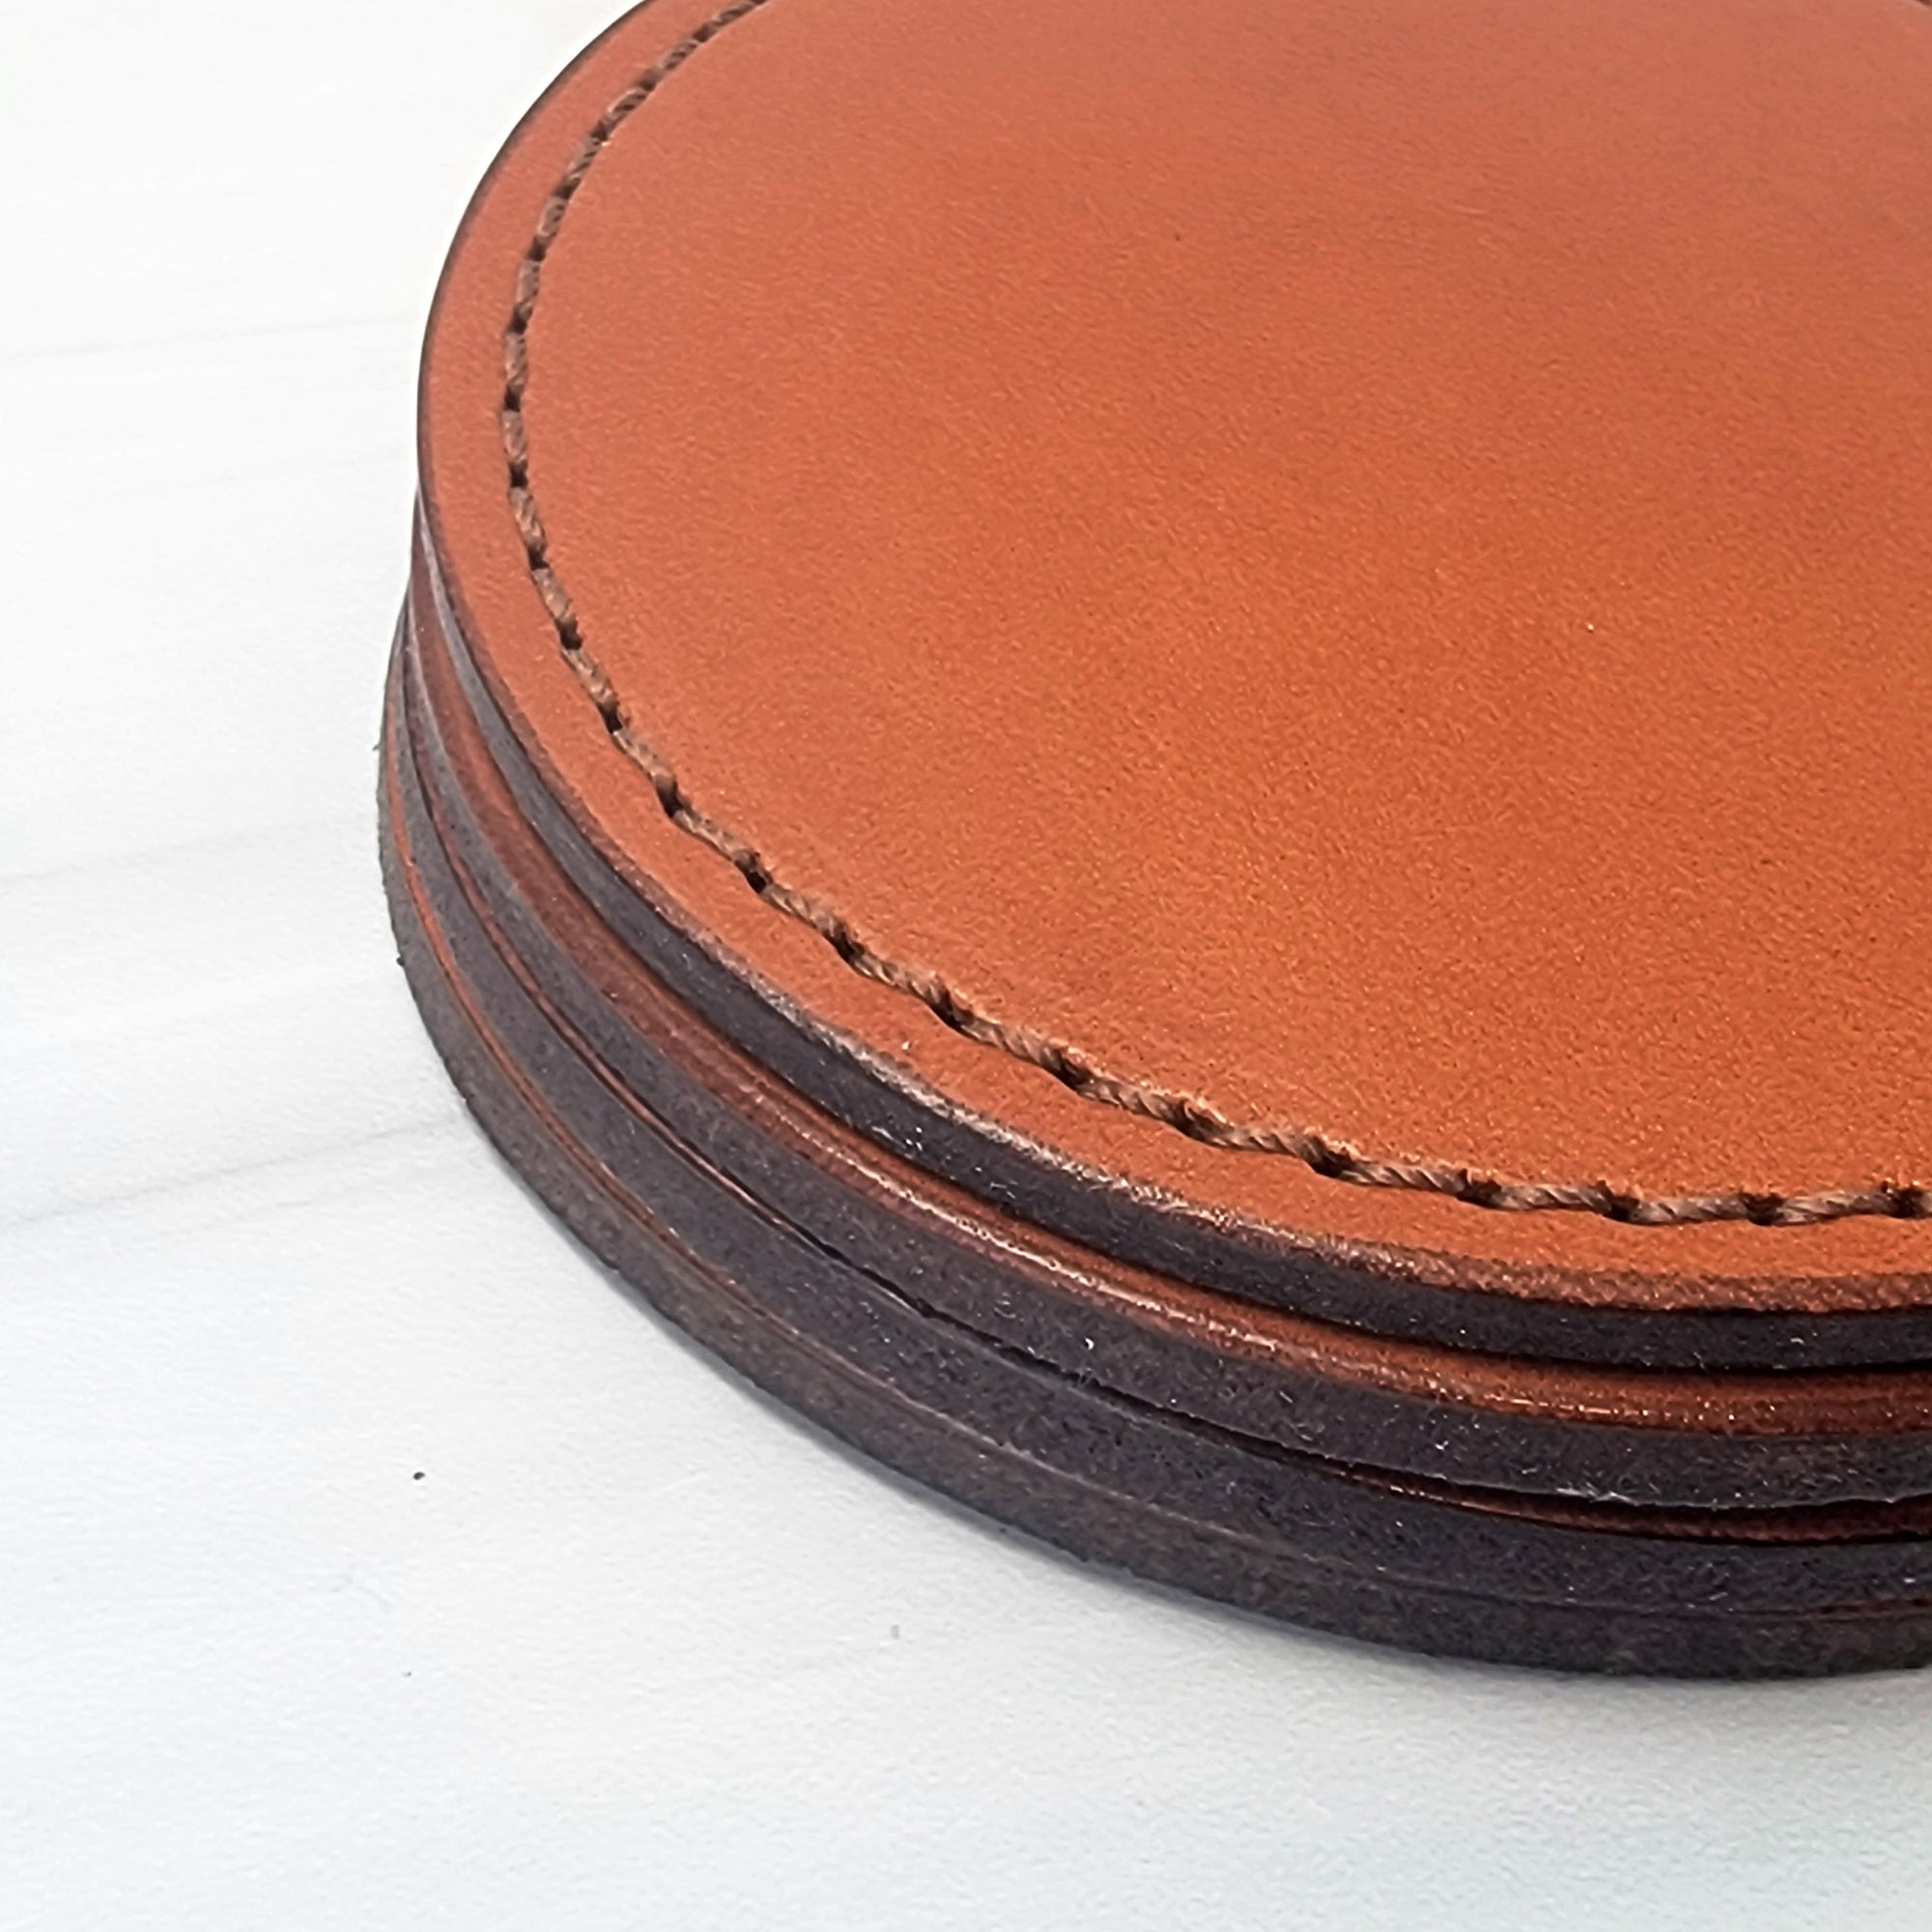 Camel leather coasters